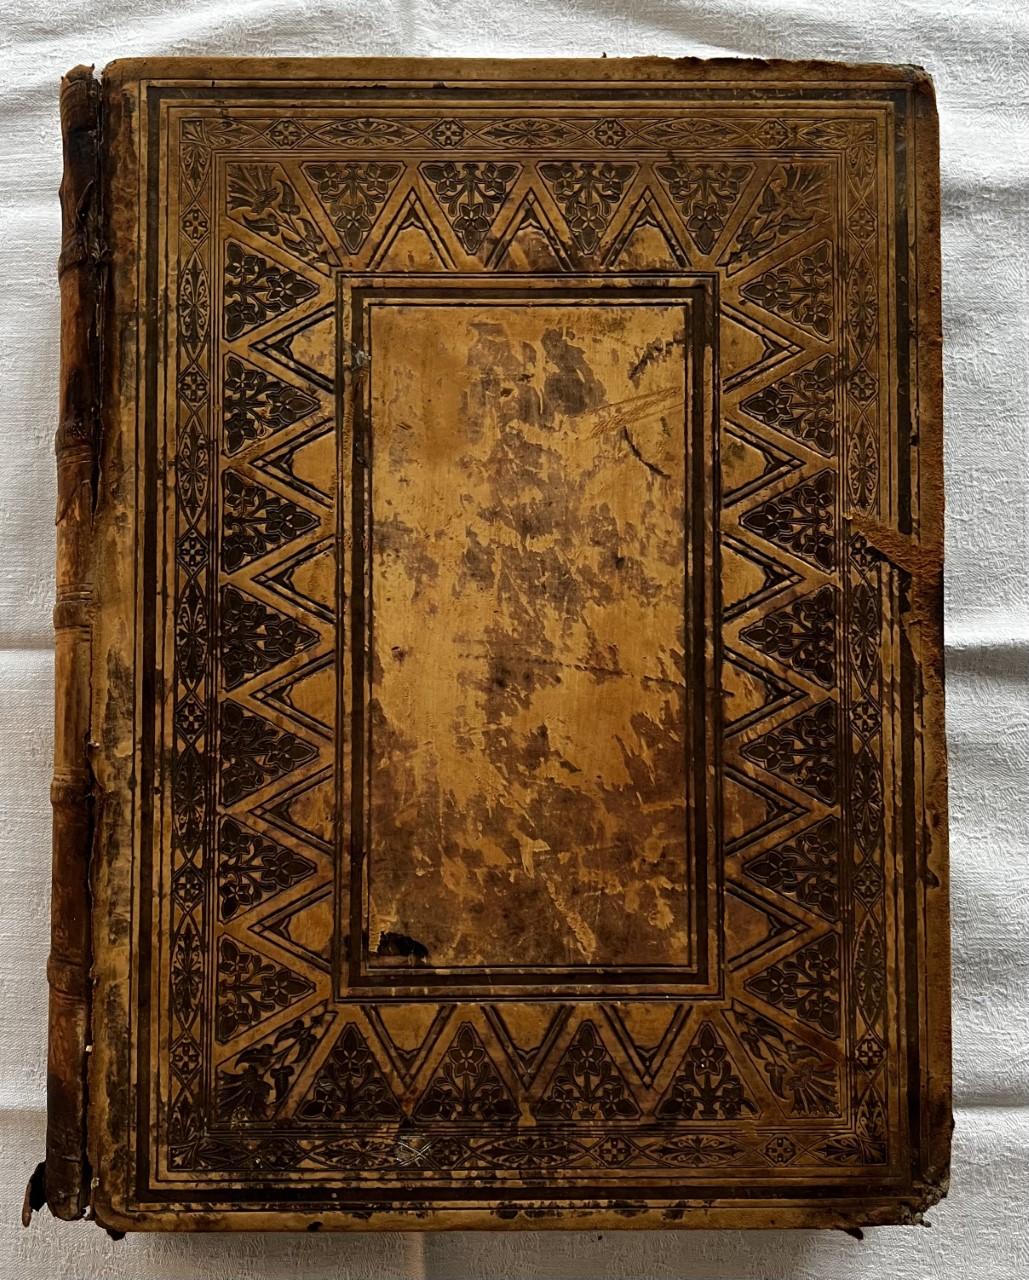 This unique book is very rare and terrific edition which goes back to late 19th century, approximately 1870-1875. This is one of two volumes of Complete Works of W. Shakespeare. This Book is Volume I and contains his Comedies like famous Midsummer